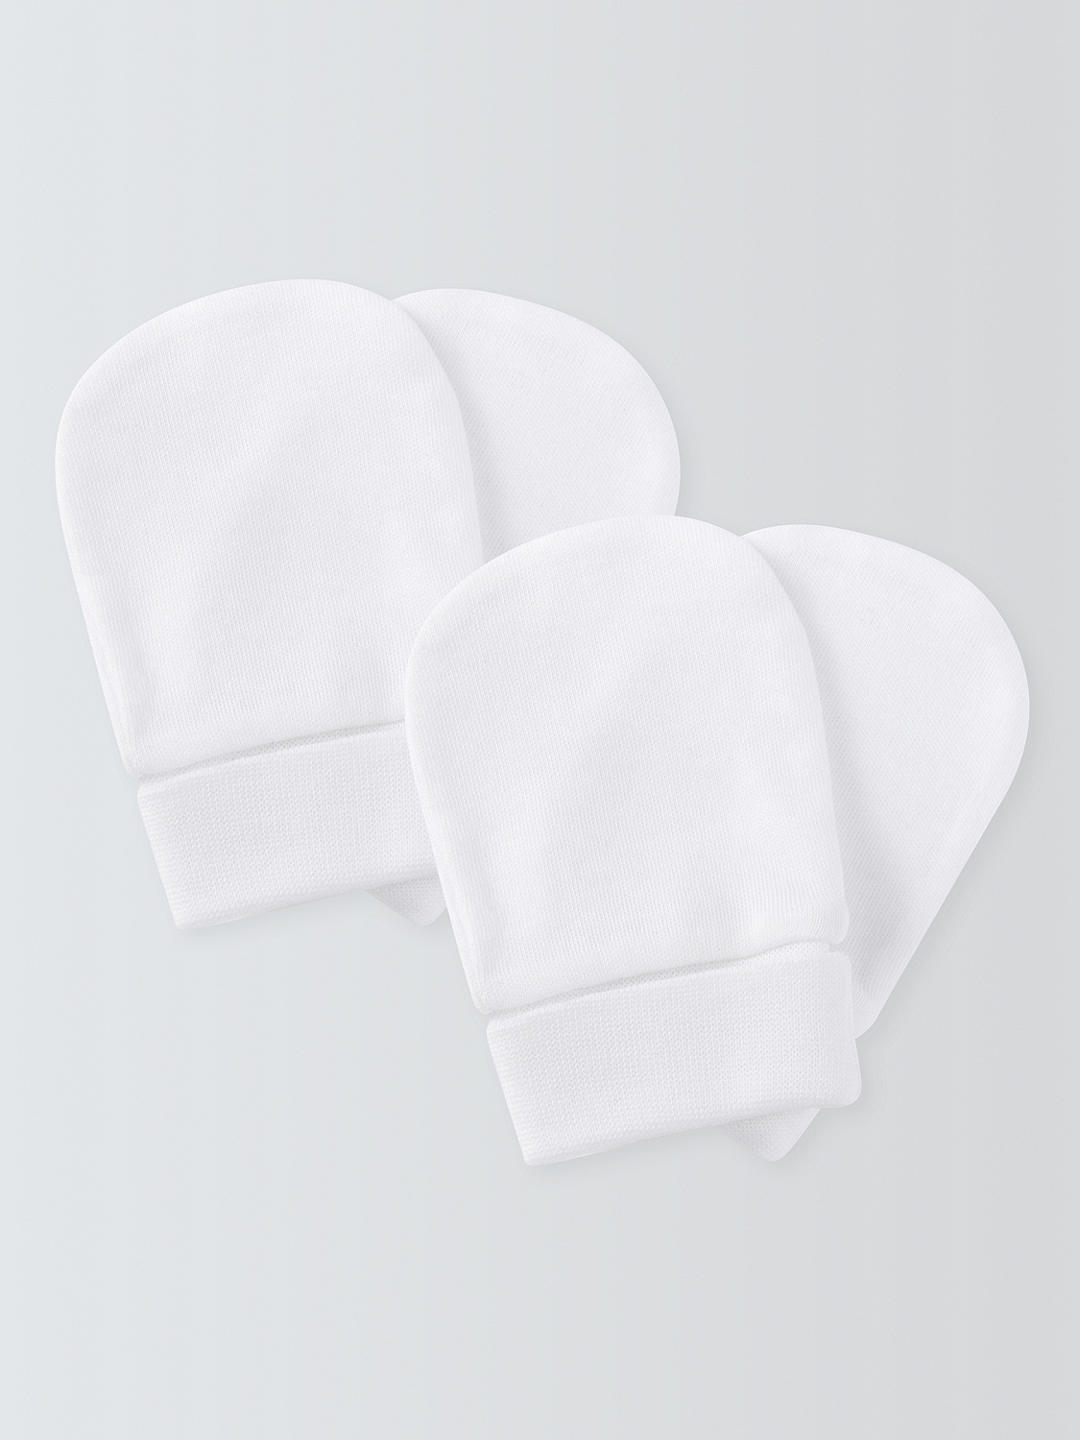 John Lewis Baby Cotton Scratch Mitts, Pack of 2, White